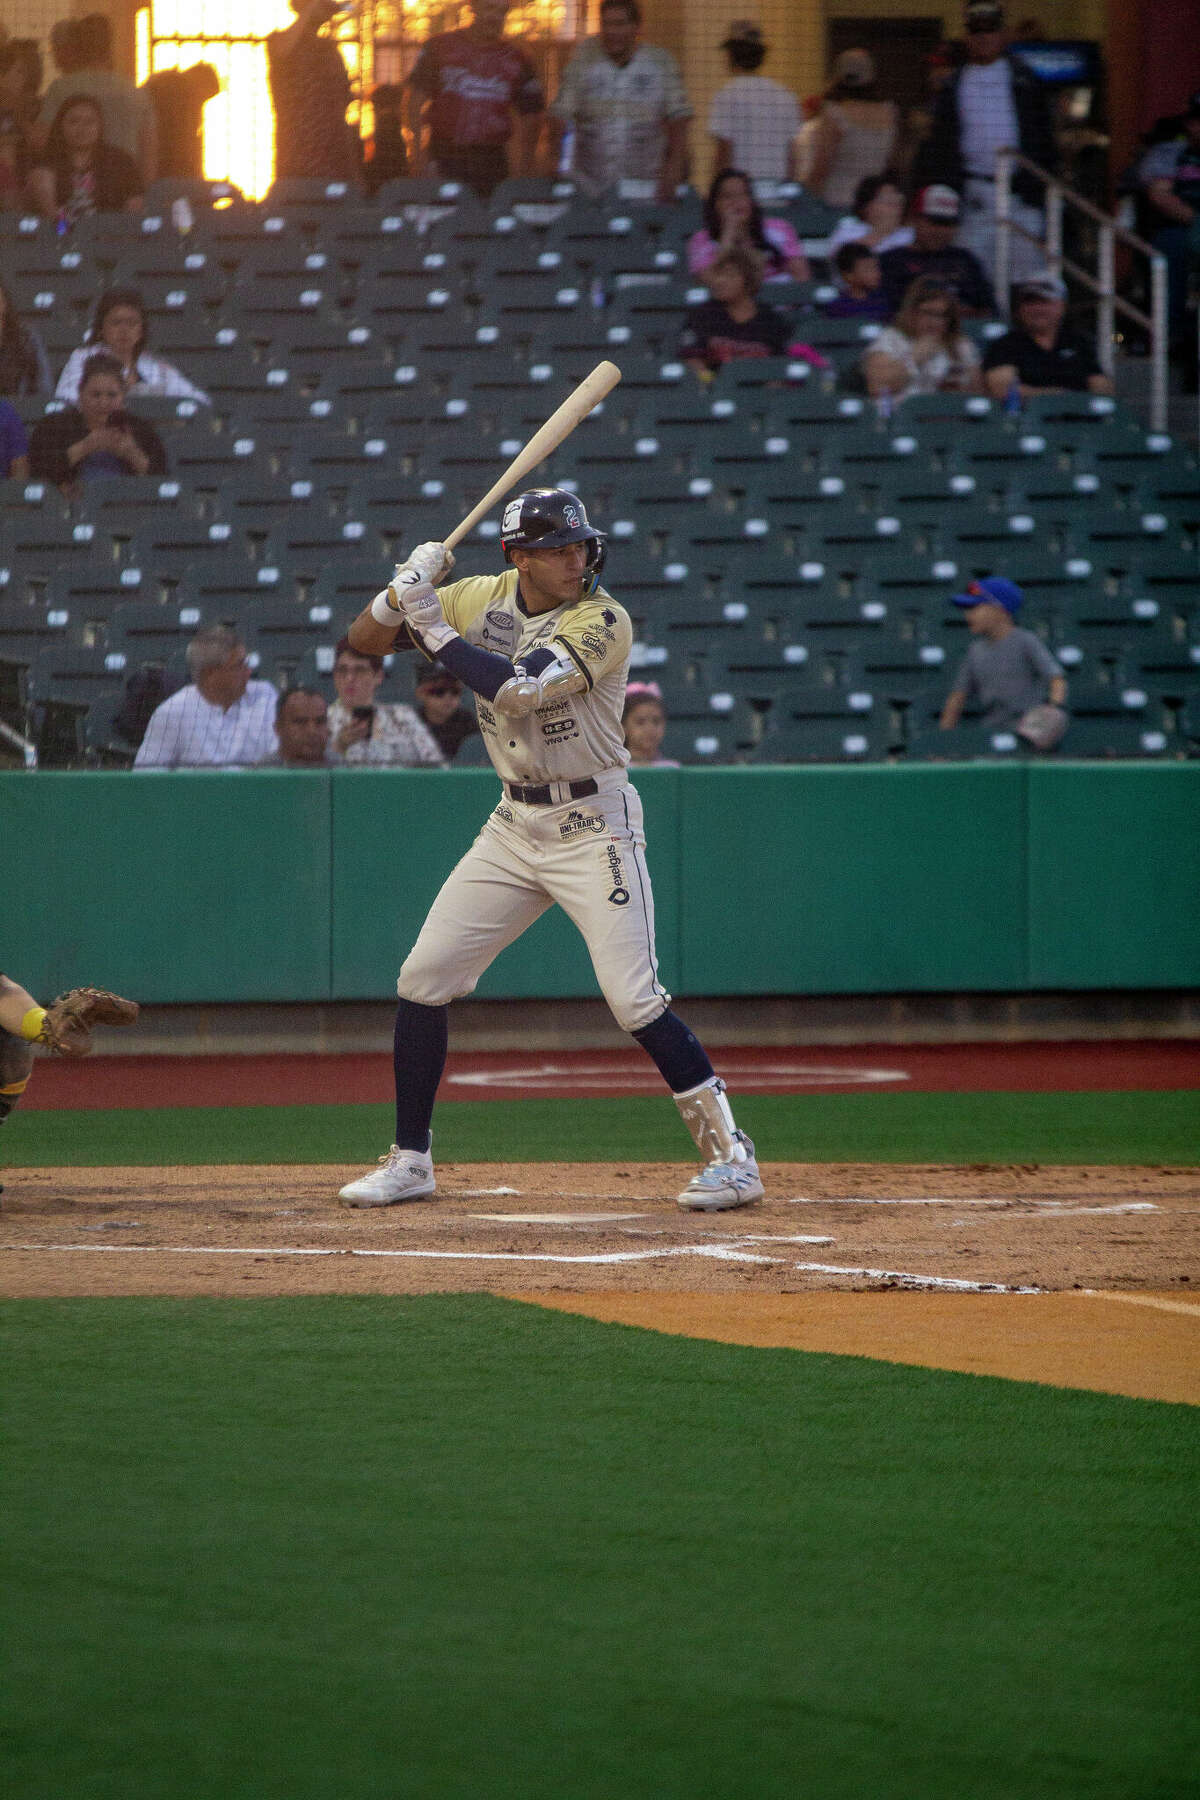 Shortstop Jake Gatewood is looking like a potential All-Star early in his first season with the Tecolotes Dos Laredos.